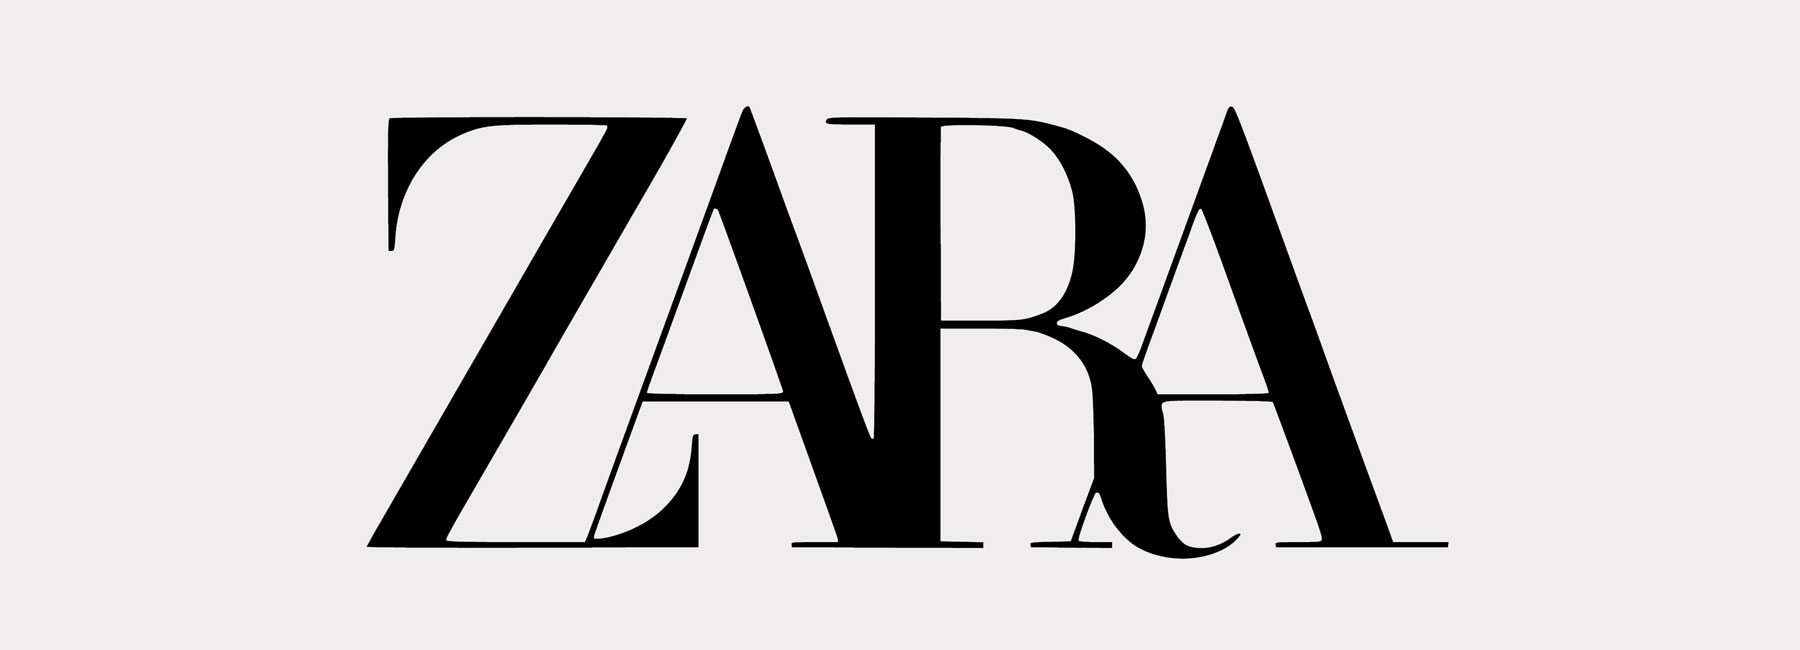  ZARA  s new logo  squeezes out criticism from other designers